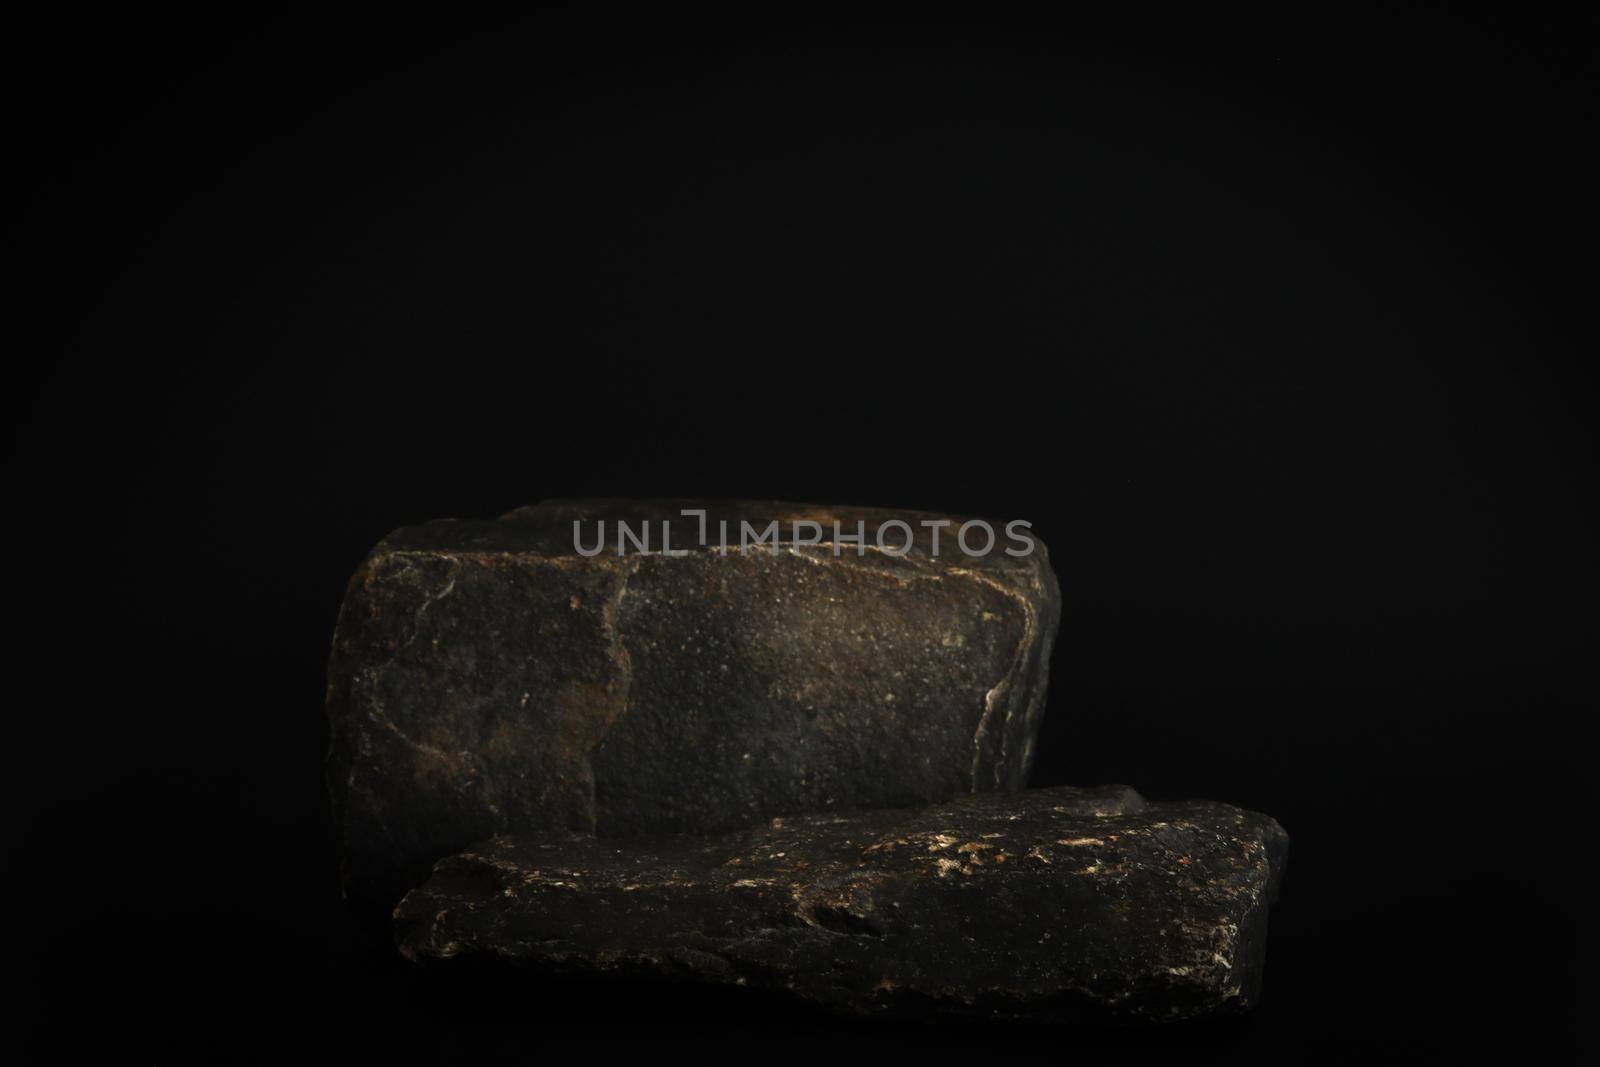 Rock podium on the black background. Stone podest for product, cosmetic presentation. Creative mock up. Pedestal or platform for beauty products